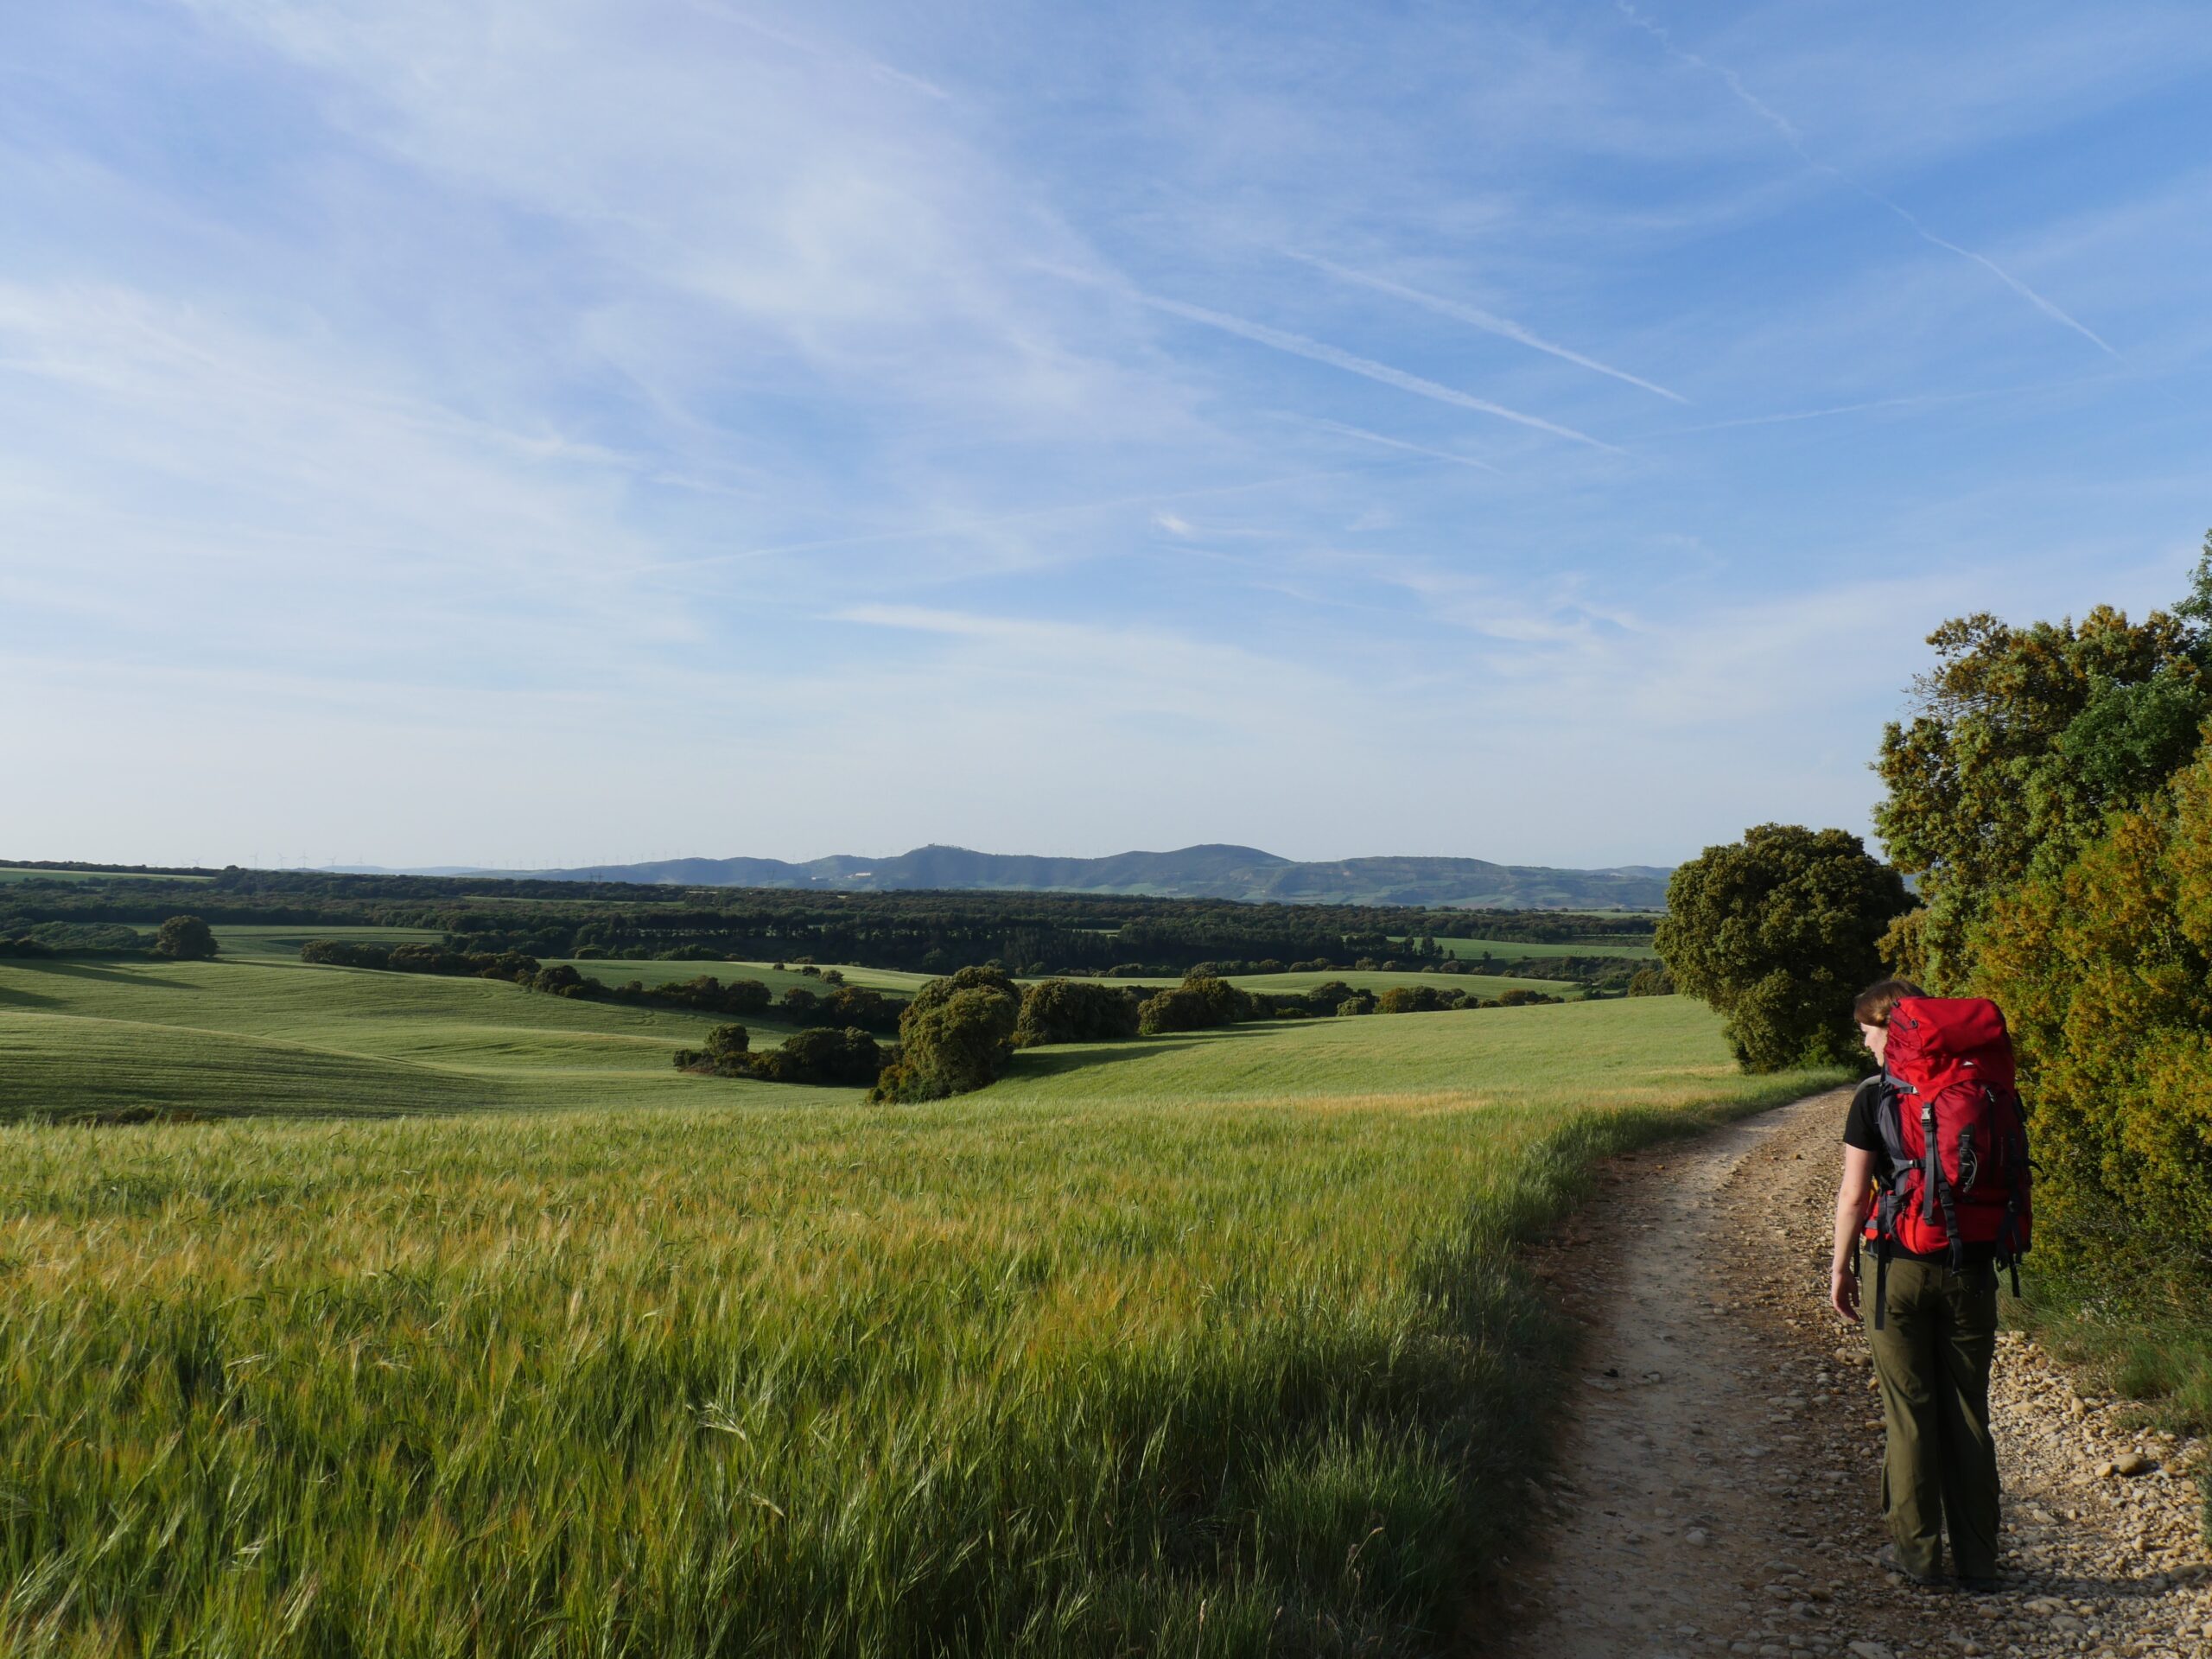 A Camino pilgrim looks out at fields of barley while walking the Camino de Santiago.